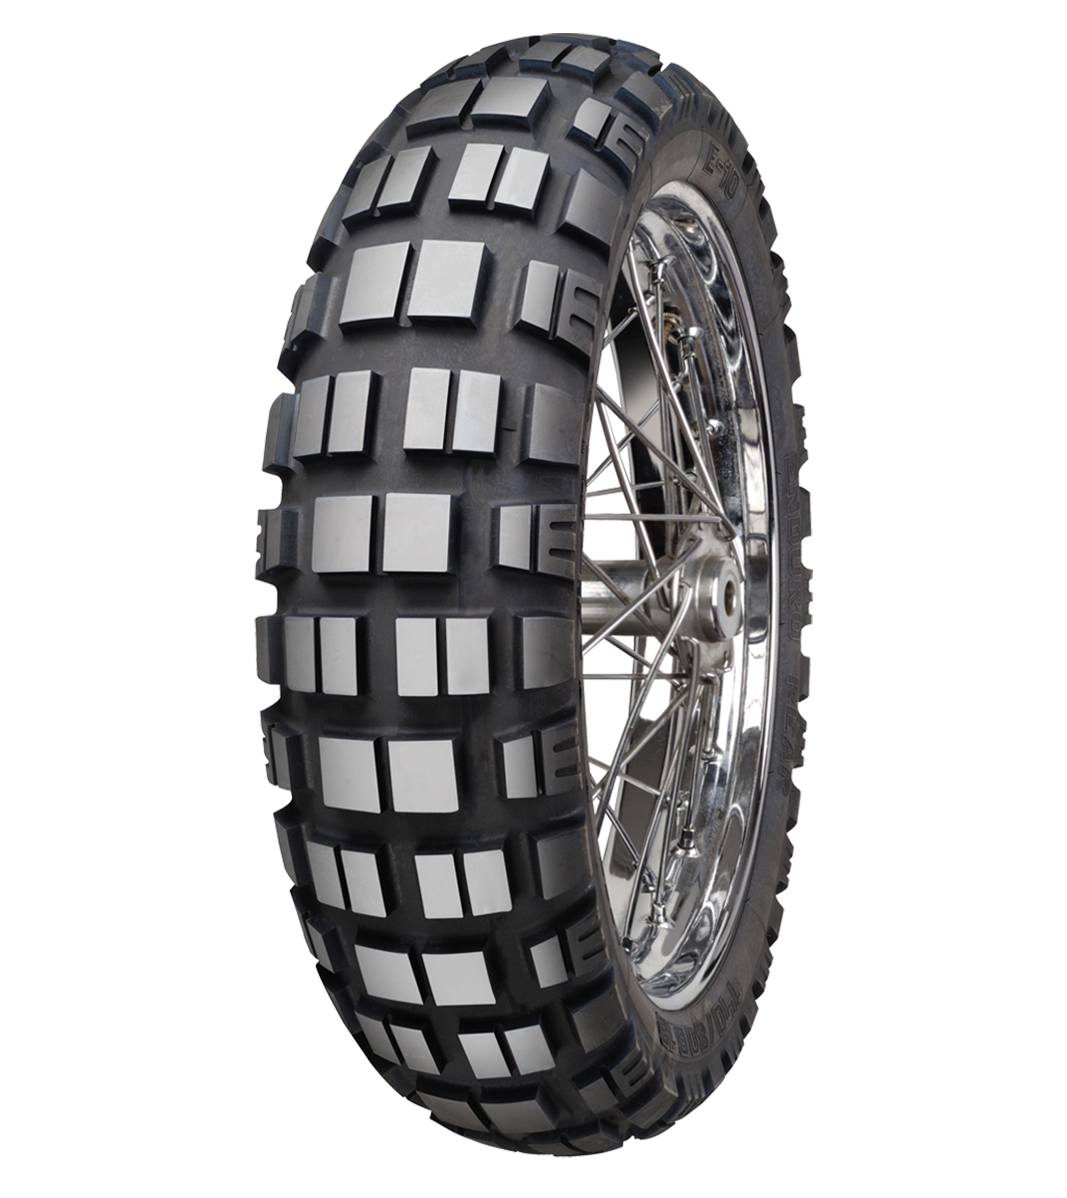 Mitas E-10 ENDURO 140/80B17 Trail OFF Trail 69T No Stripe Tubeless Rear Tire, 224160, 140/80B17, Adventure Touring, E Series, E-10 Enduro, Rear, Trail, Trail OFF, Tires - Imported and distributed in North & South America by Lindeco Genuine Powersports - Premier Powersports Equipment and Accessories for Motorcycle Enthusiasts, Professional Riders and Dealers.